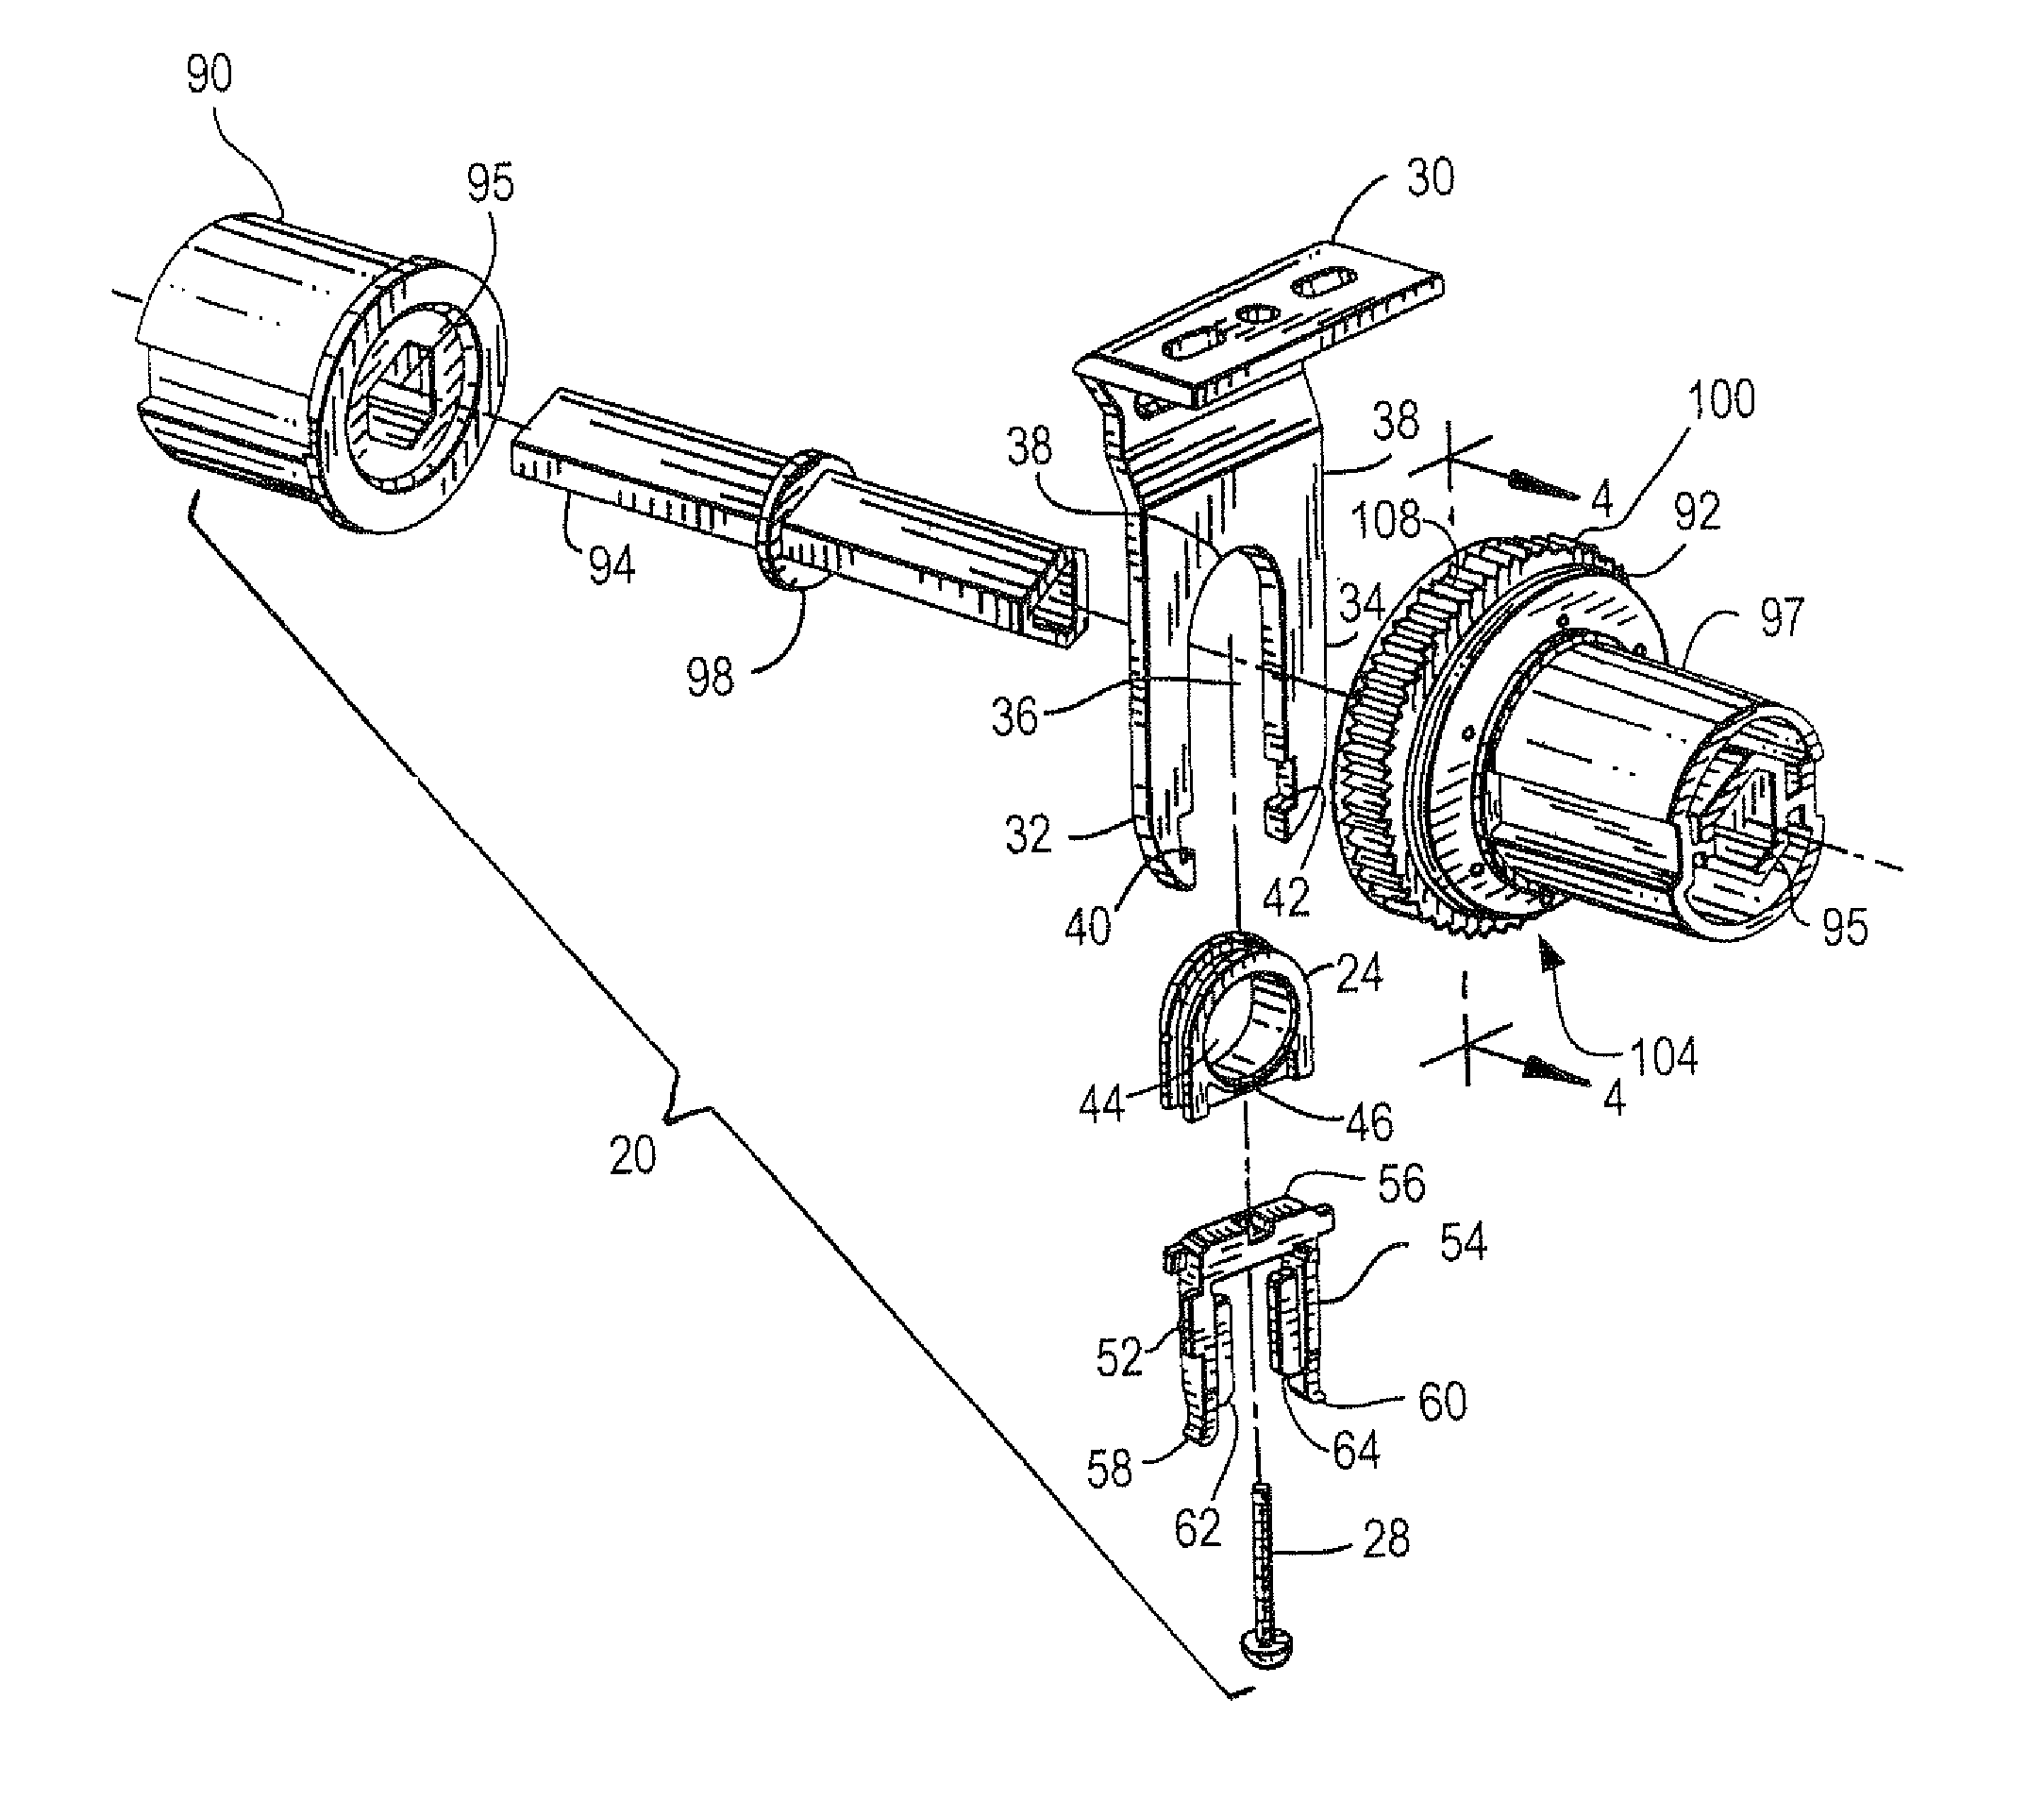 Multi-section window dressing with coupling clutch